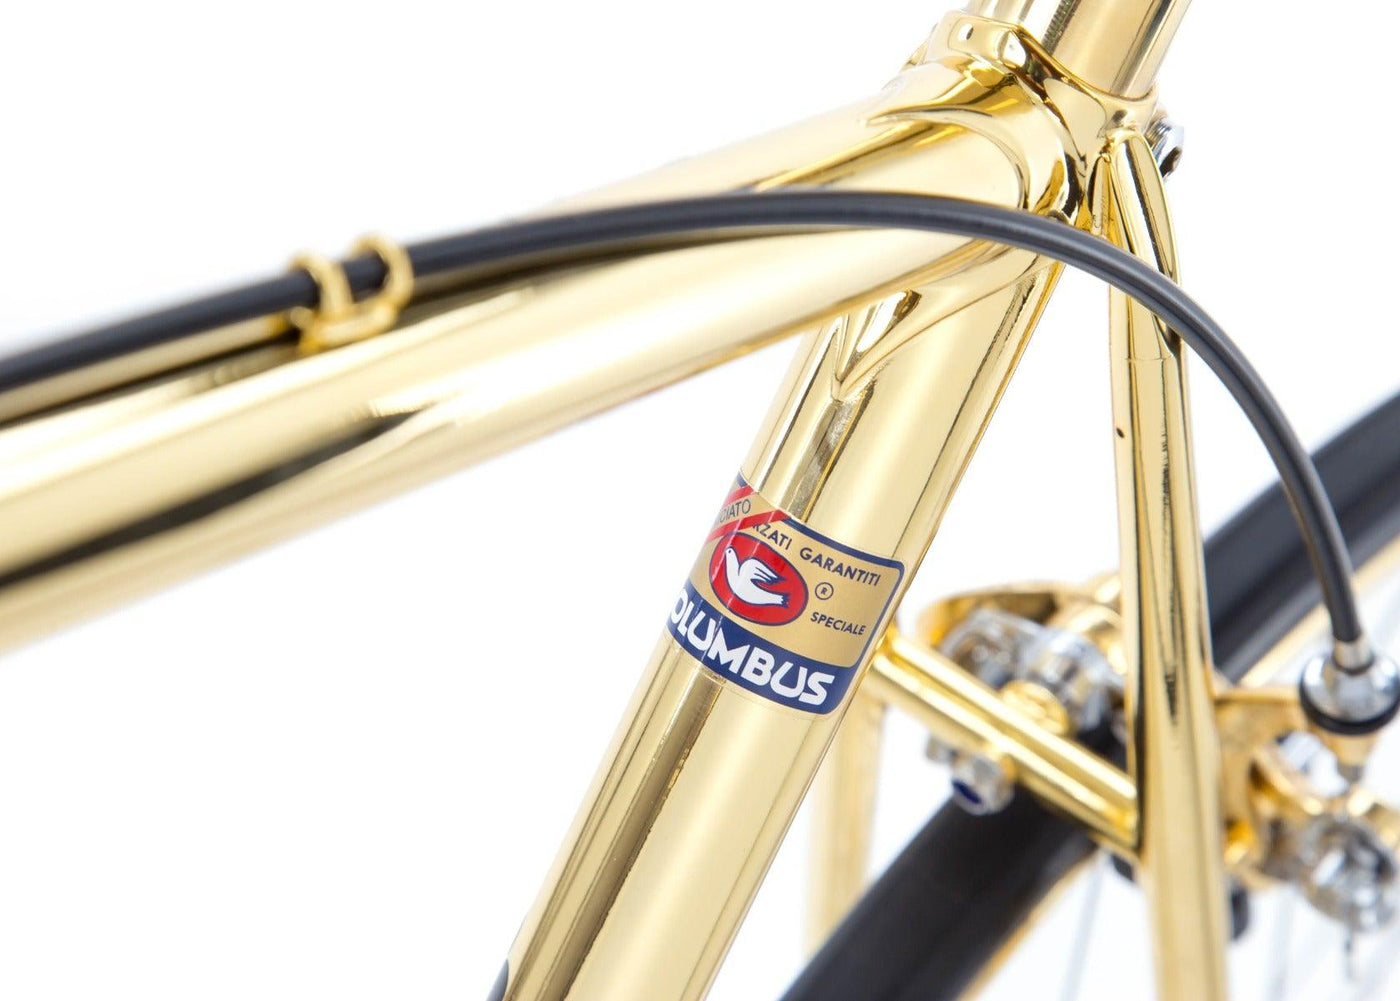 Colnago Super Oro 24k Gold Plated Bicycle 1970s - Steel Vintage Bikes